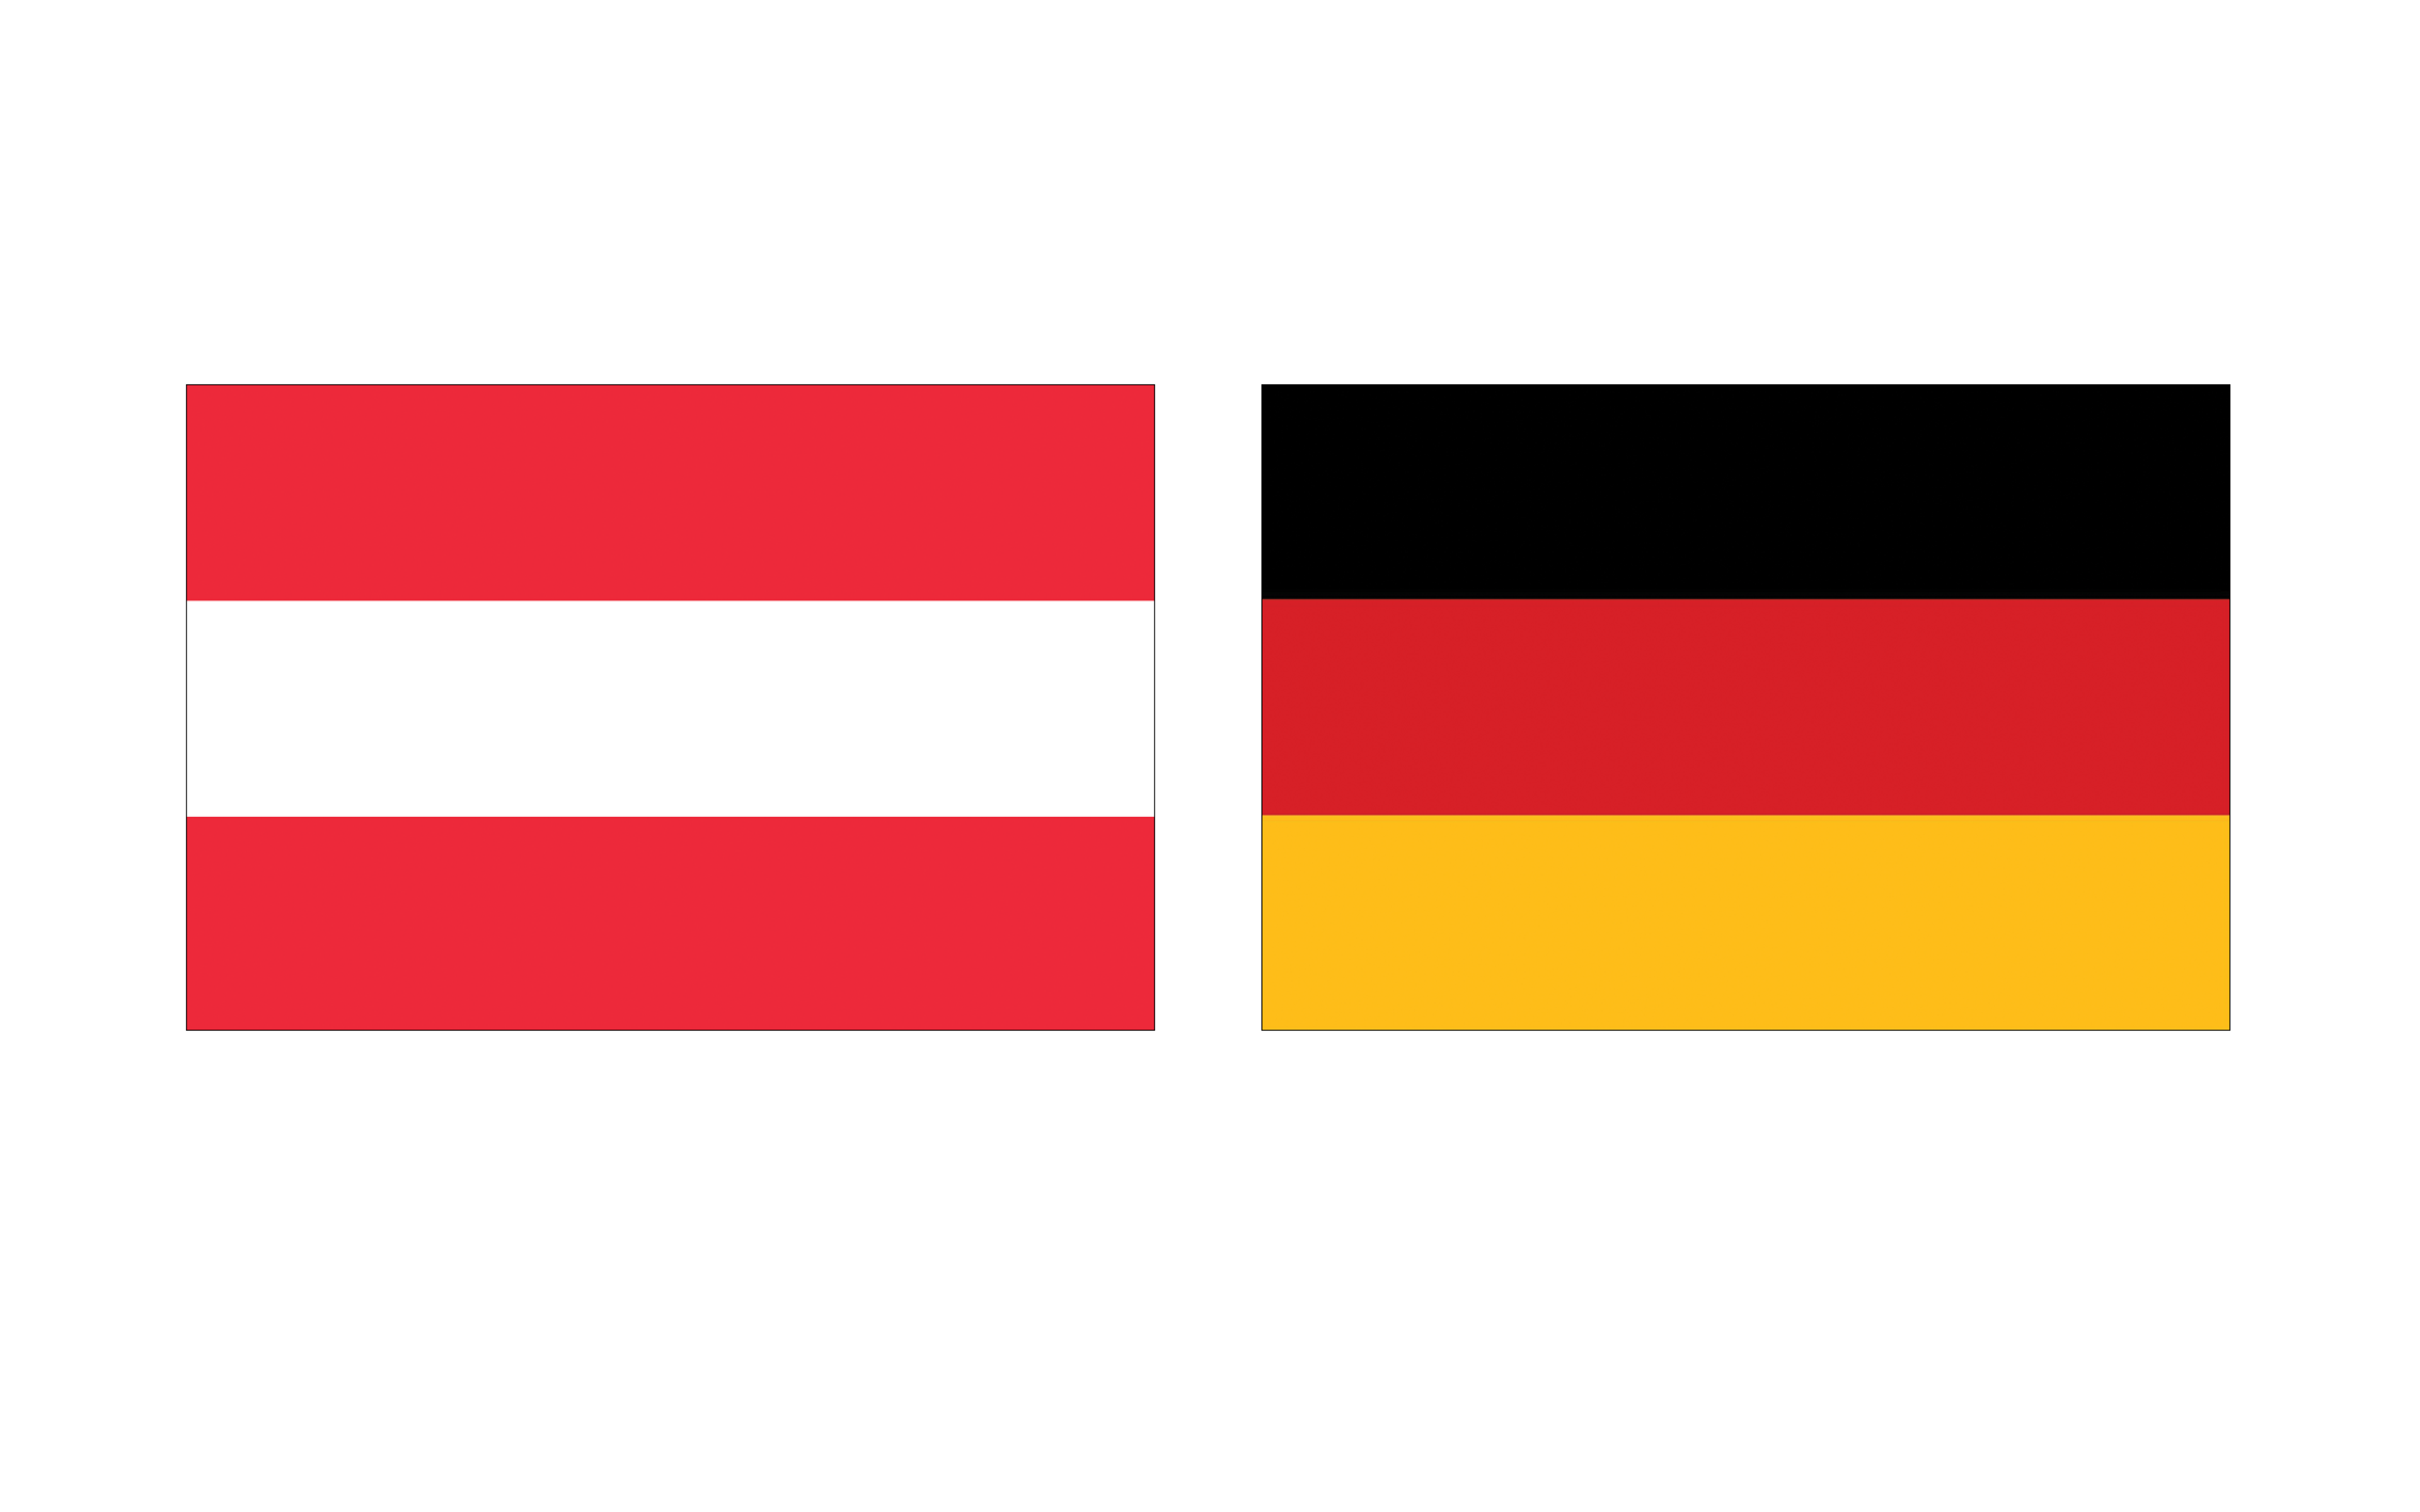 Austrian and Germany national flags